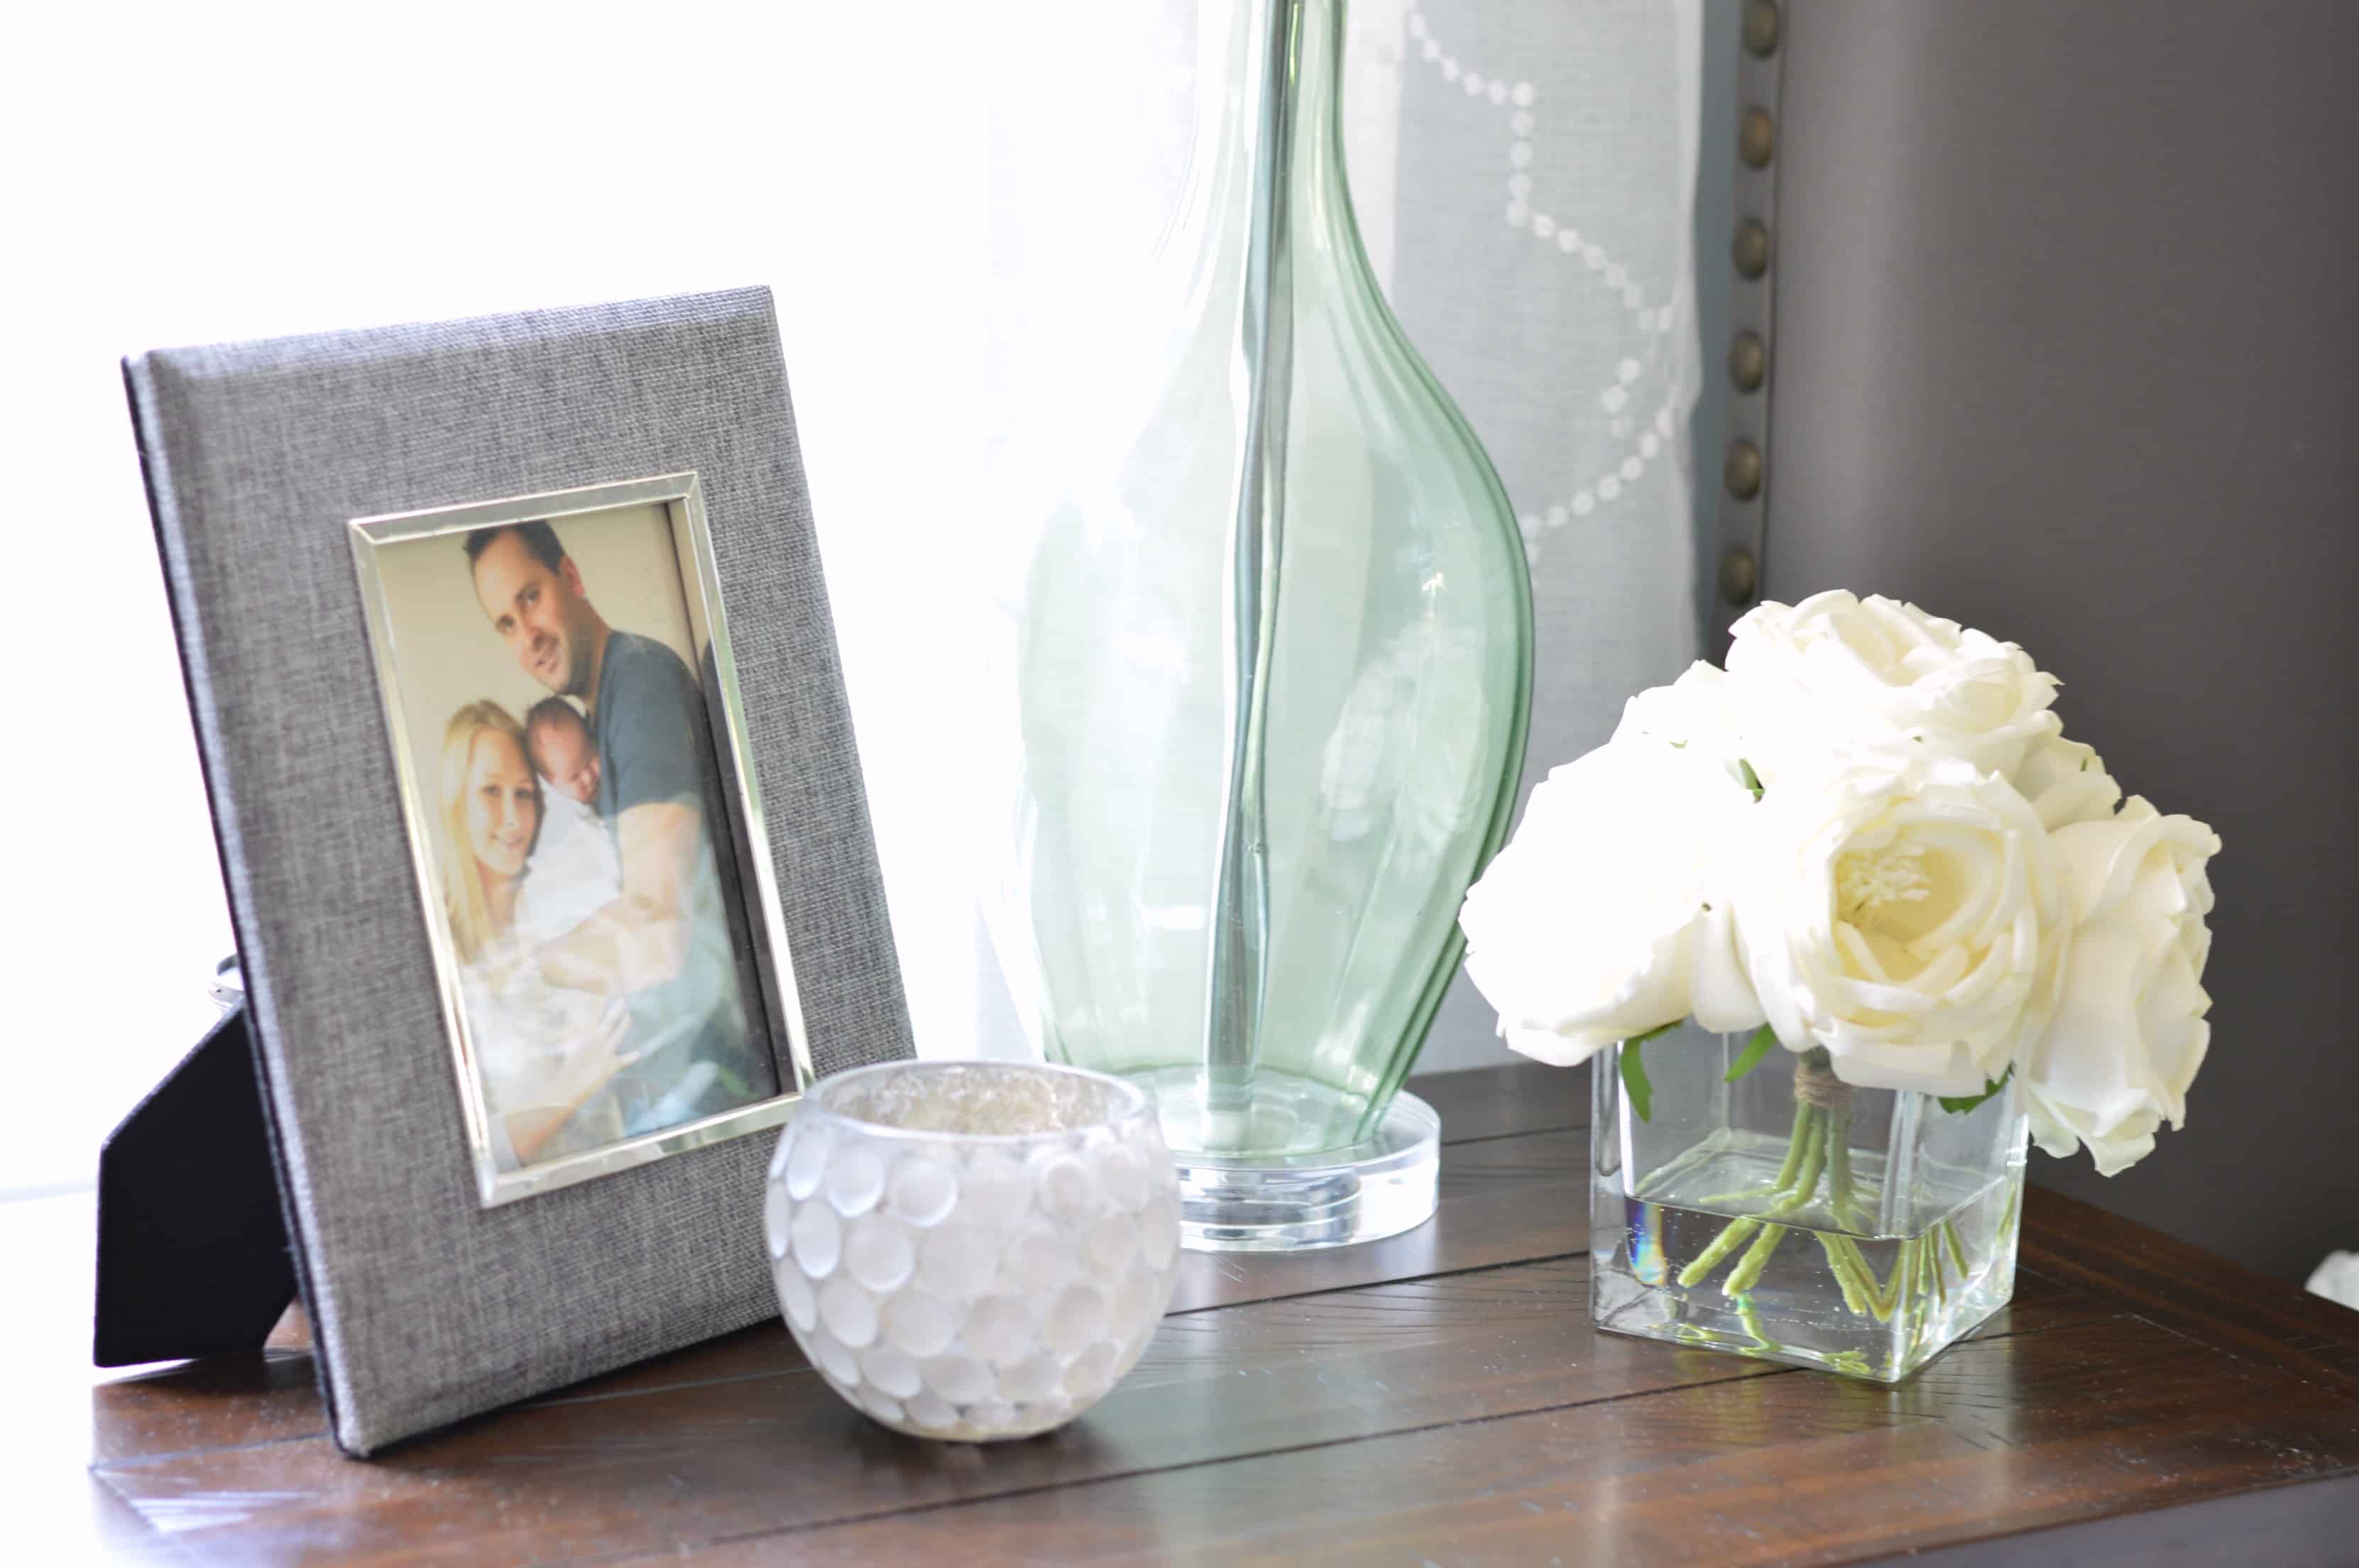 A nightstand near a window with a portrait of a family in a grey frame, a candle, the glass base of a lamp shade and a square vase with short, white flowers